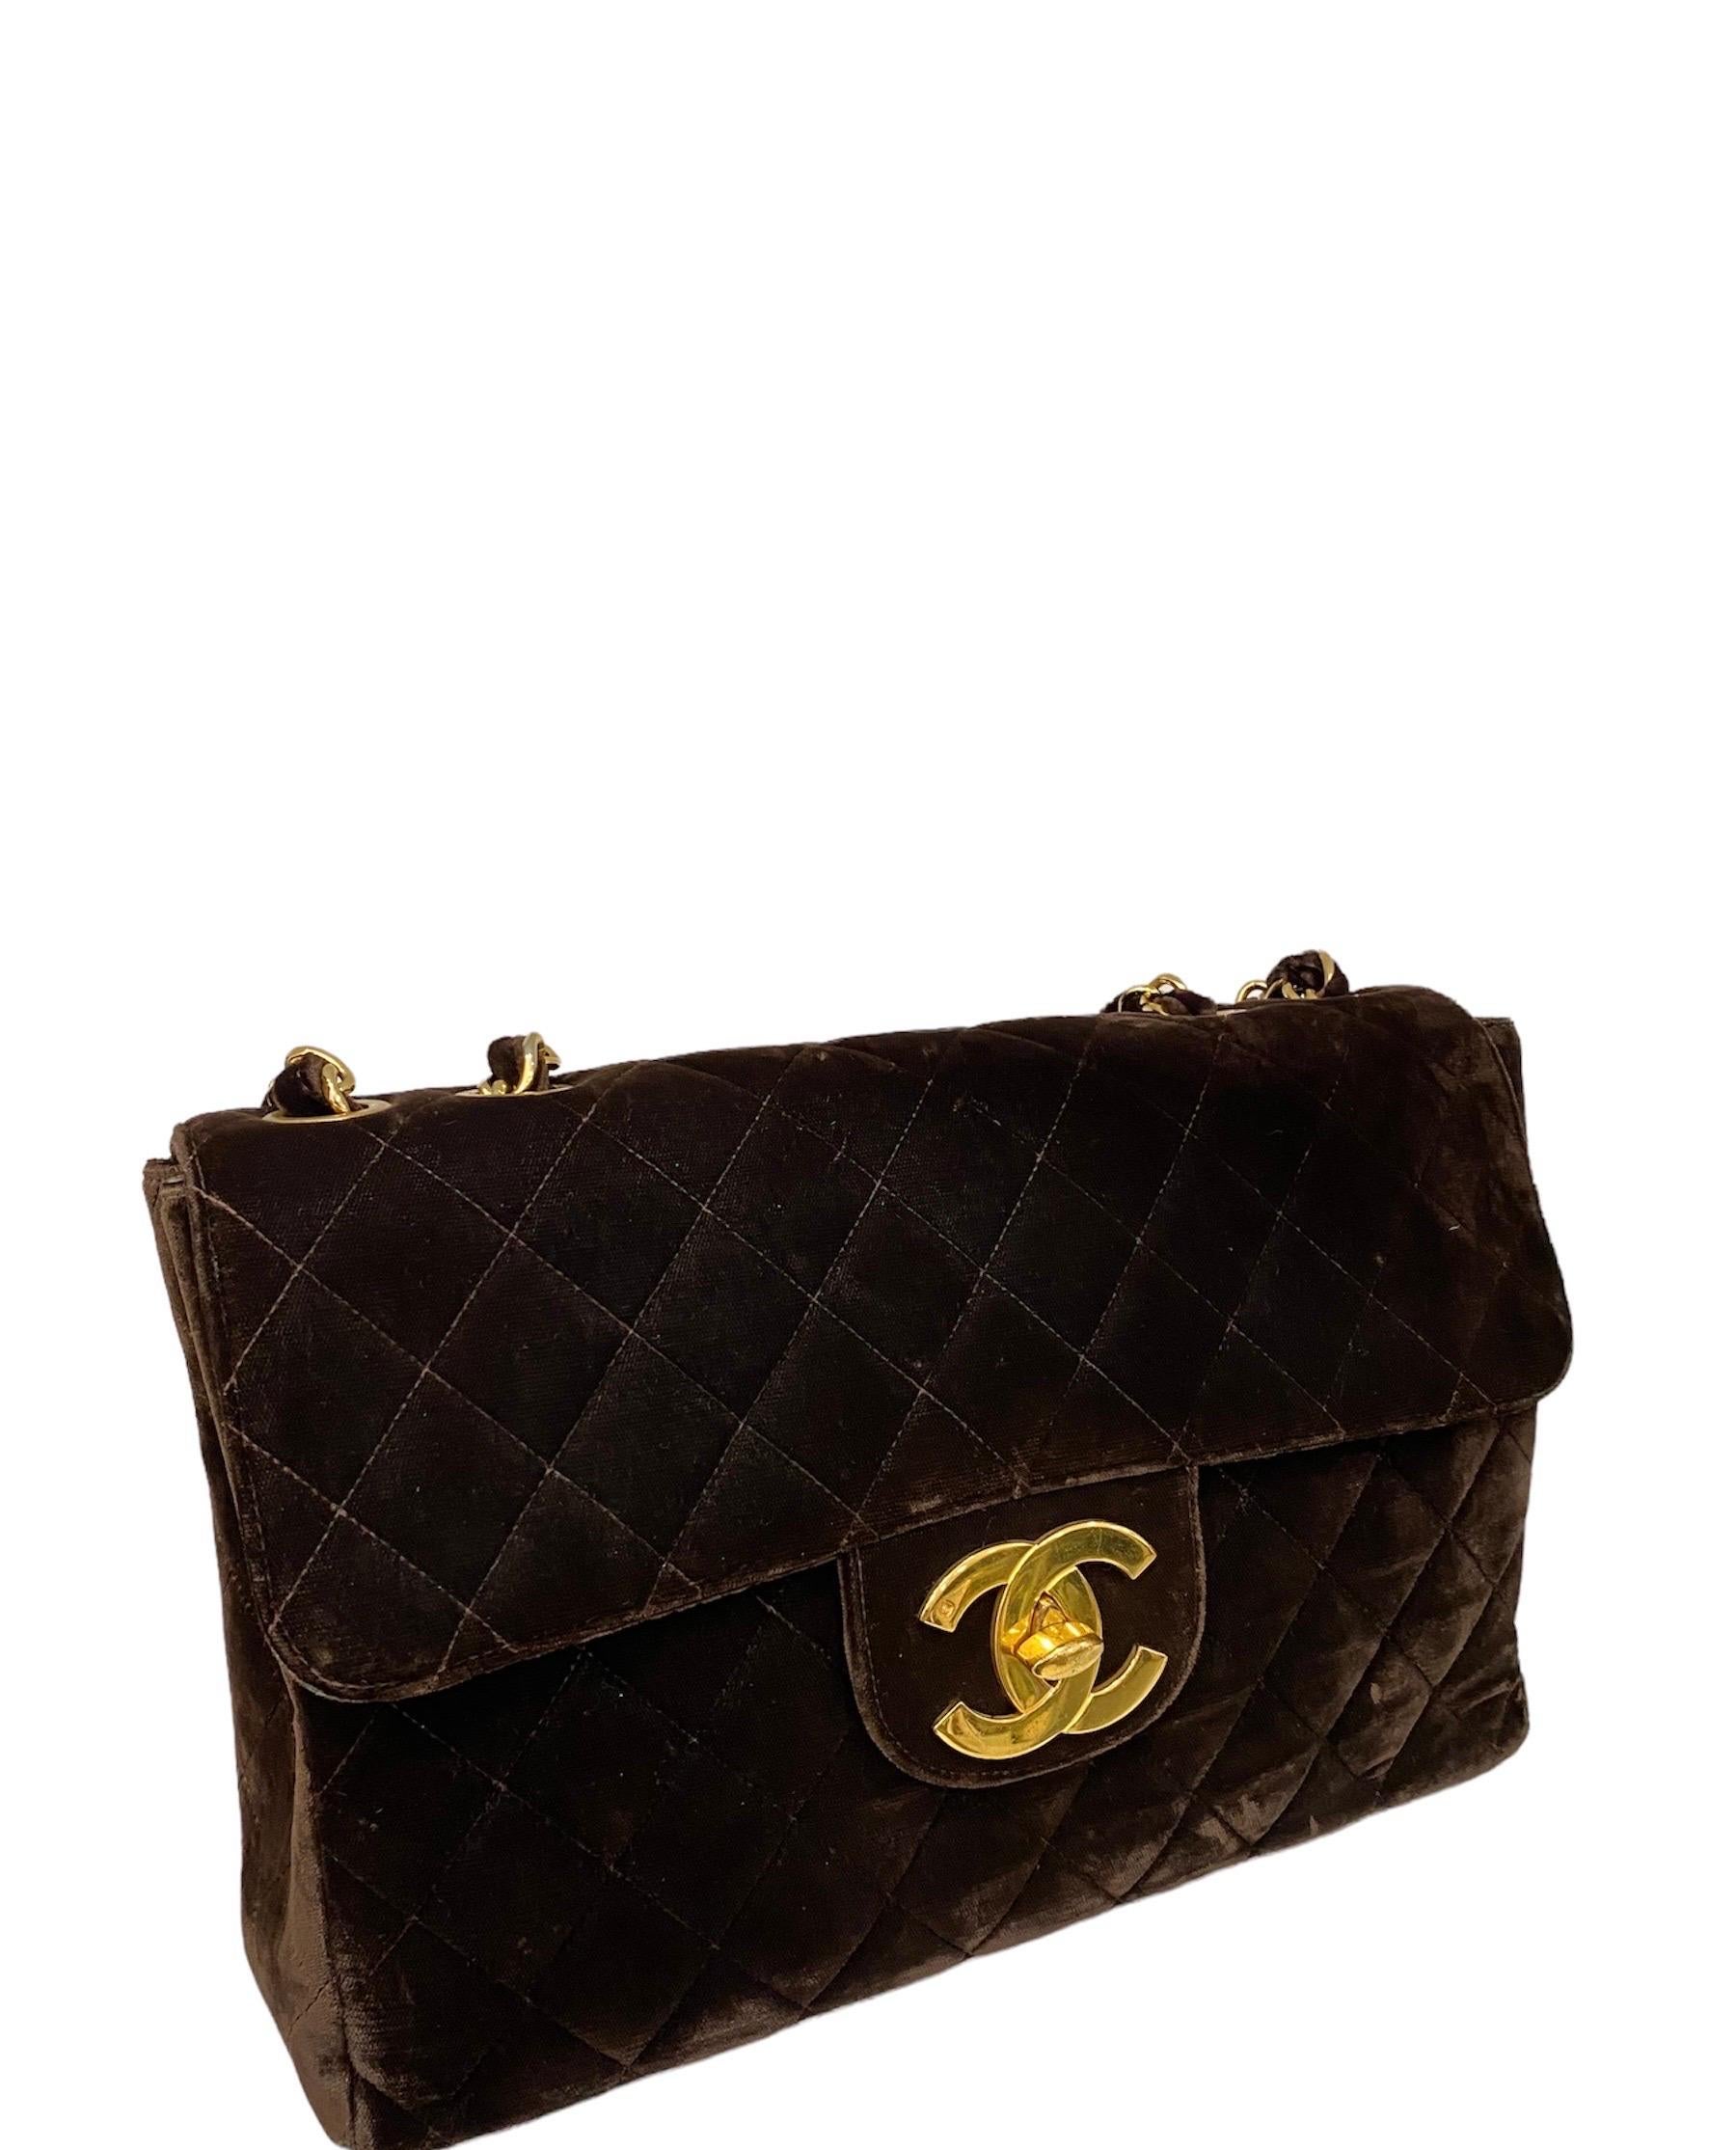 Chanel bag model Maxi Jumbo Big Logo Vintage line made of brown velvet, gold hardware.

Interlocking closure with corresponding CC big logo.

Internally lined in leather, very roomy.

Sliding velvet and chain shoulder strap.

Wearable on the